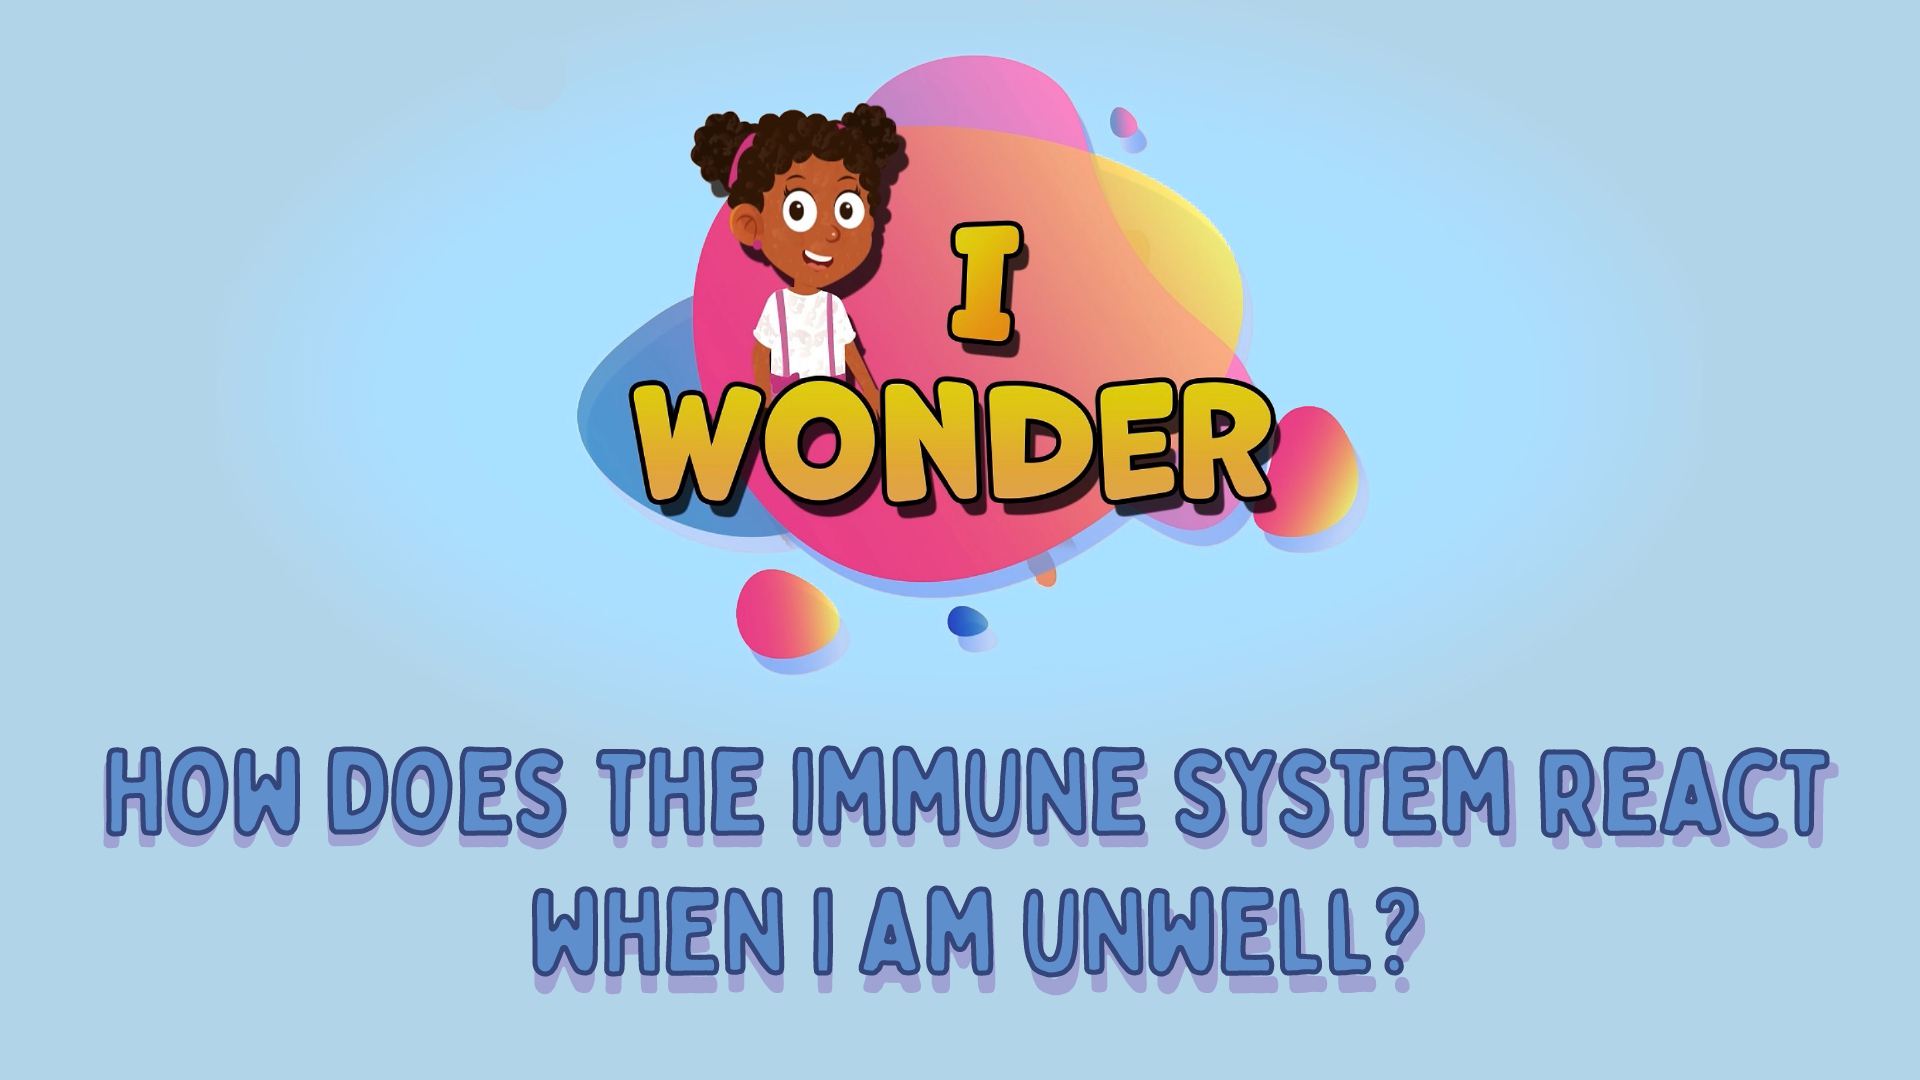 How Does The Immune System React When I Am Unwell?